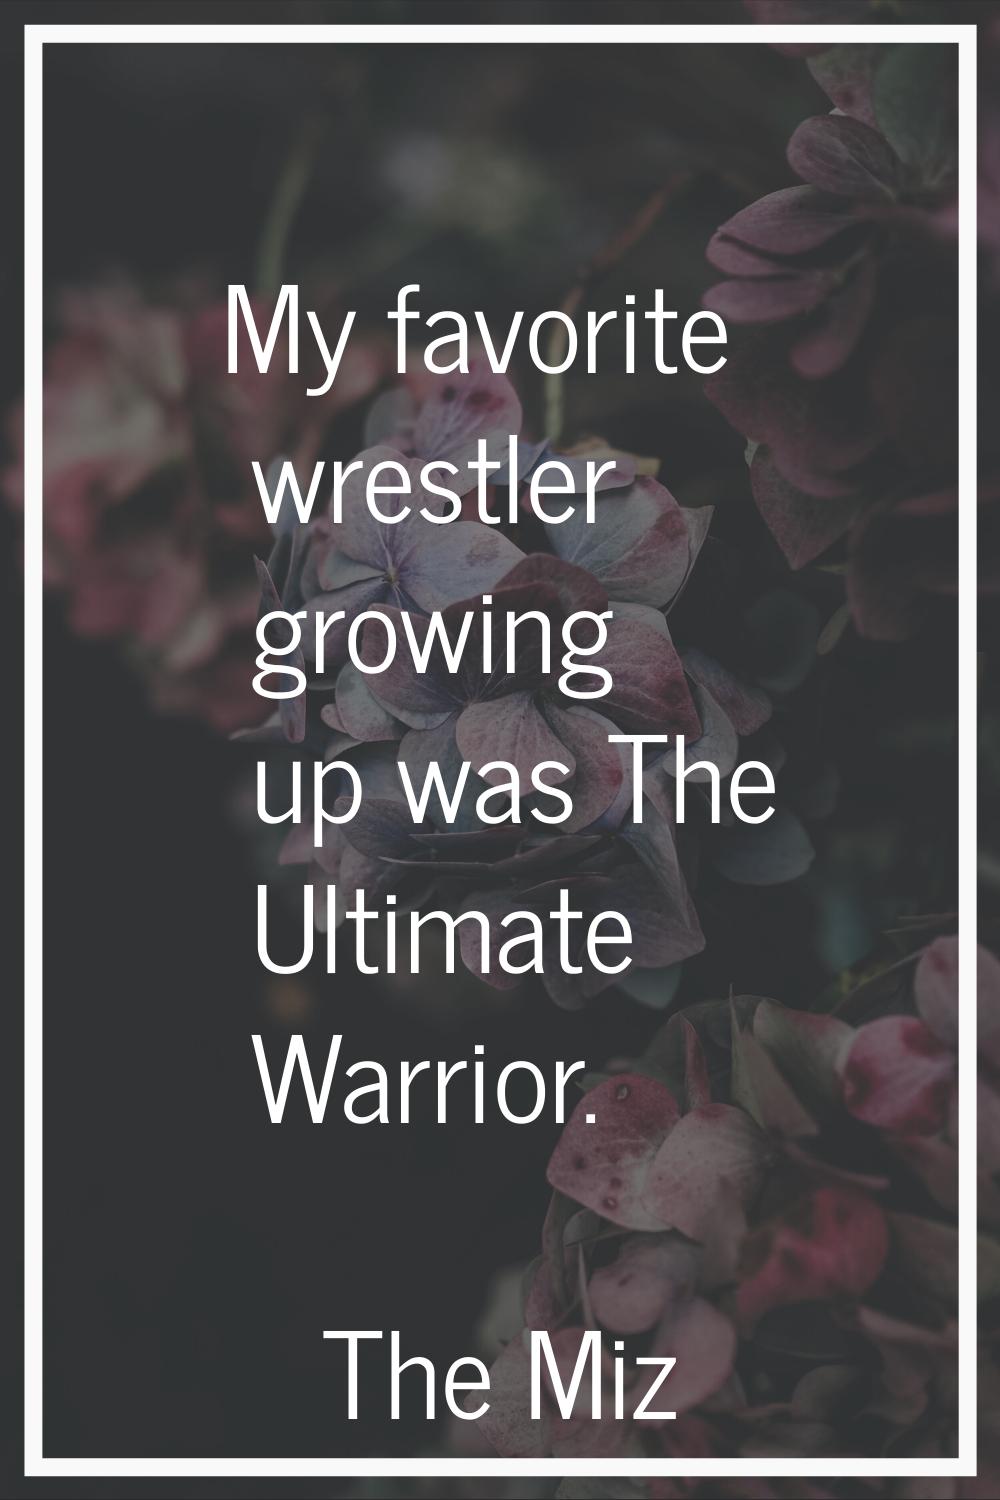 My favorite wrestler growing up was The Ultimate Warrior.